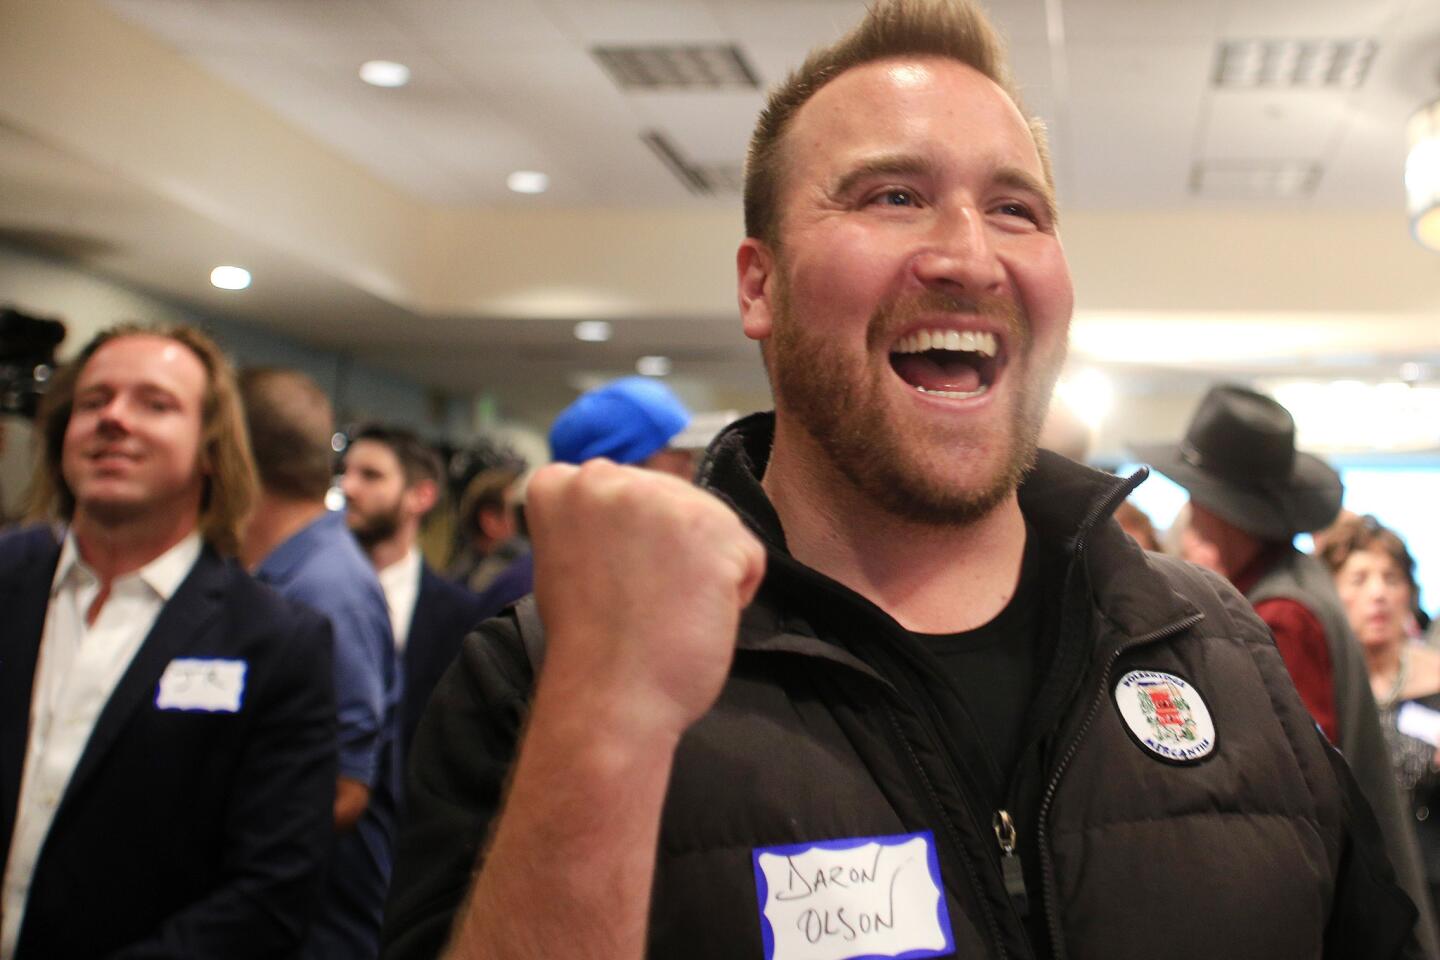 Daron Olson reacts as Republican Greg Gianforte's election lead is announced in Bozeman, Mont.